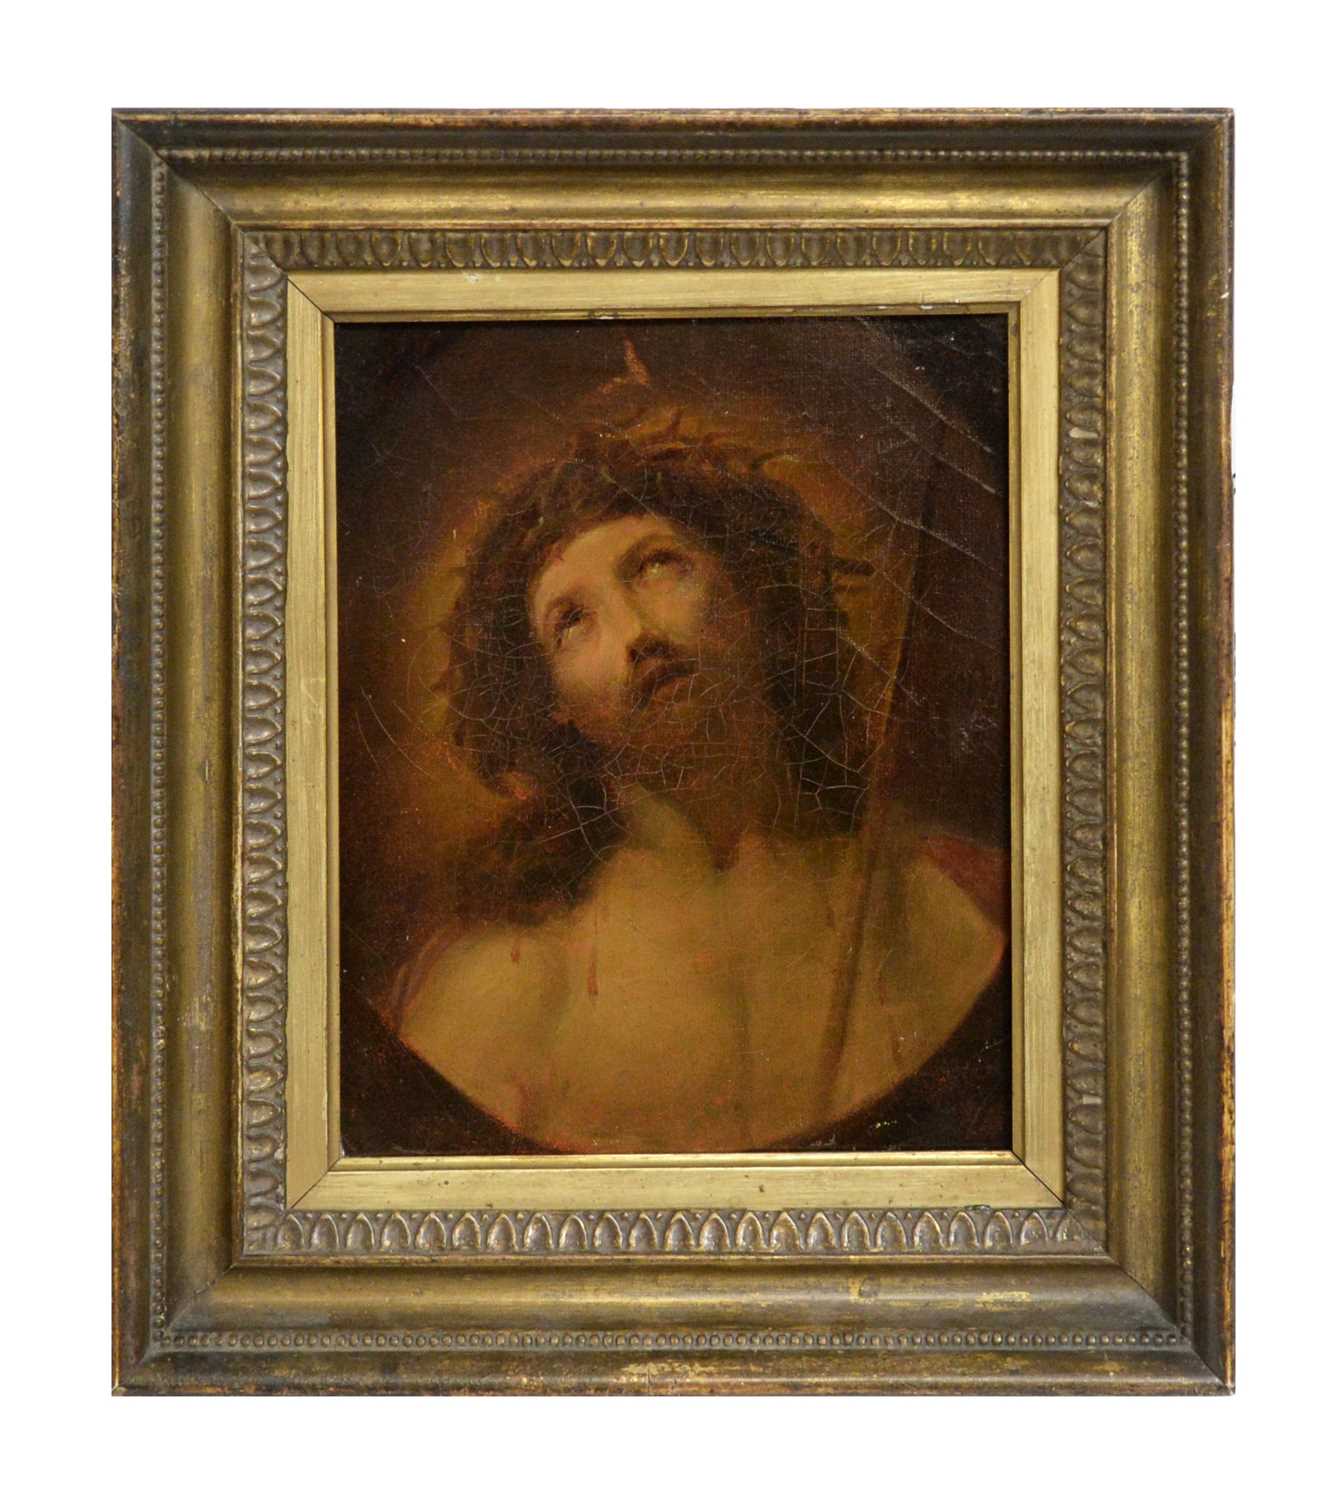 Lot 772 - 19th Century - Portrait of Christ wearing a crown of thorns | oil